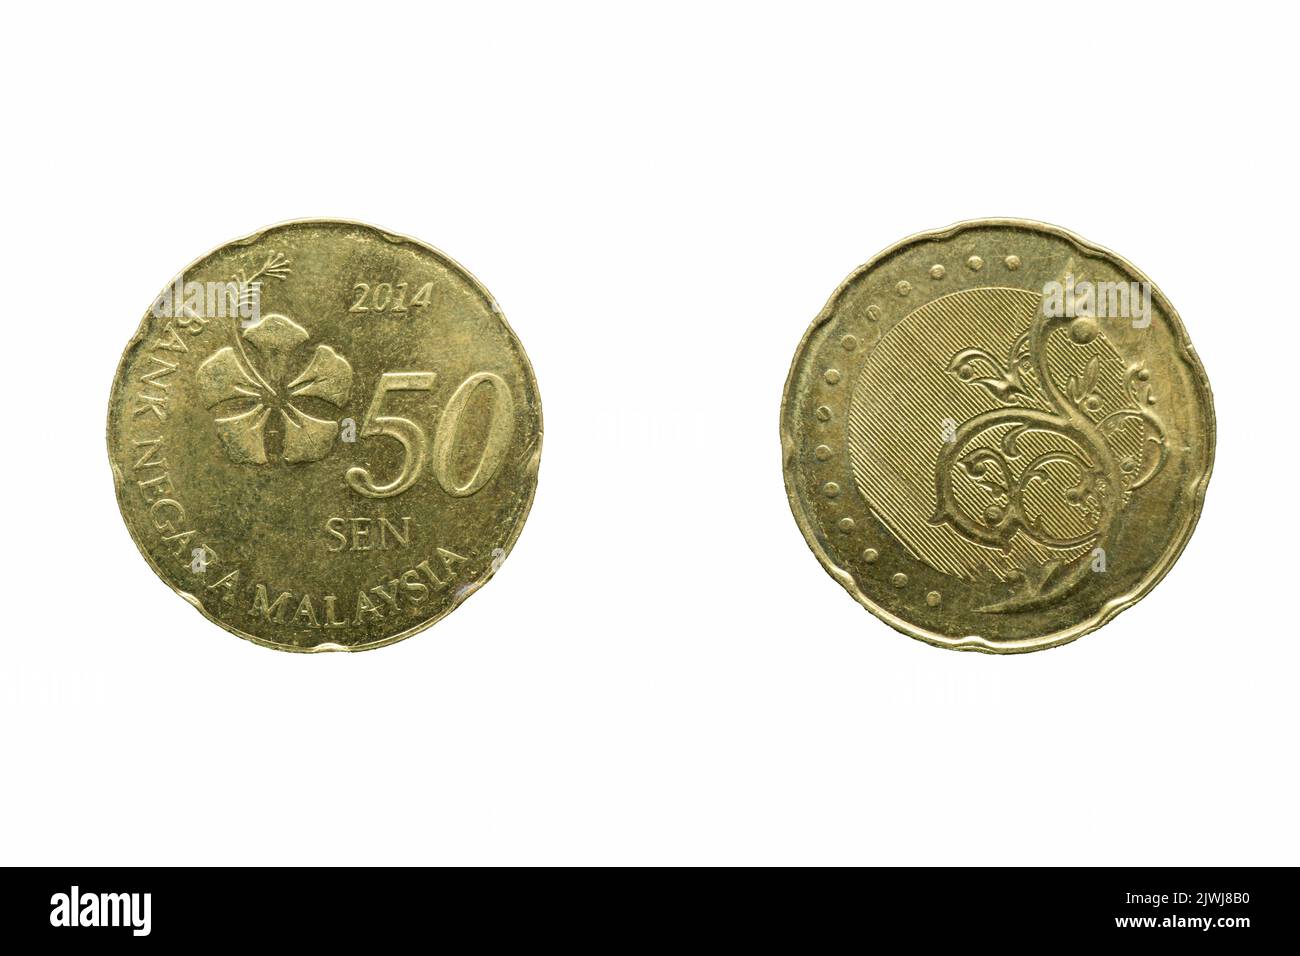 50 Cent coin, Front and back, 2014,  Malayasia Stock Photo